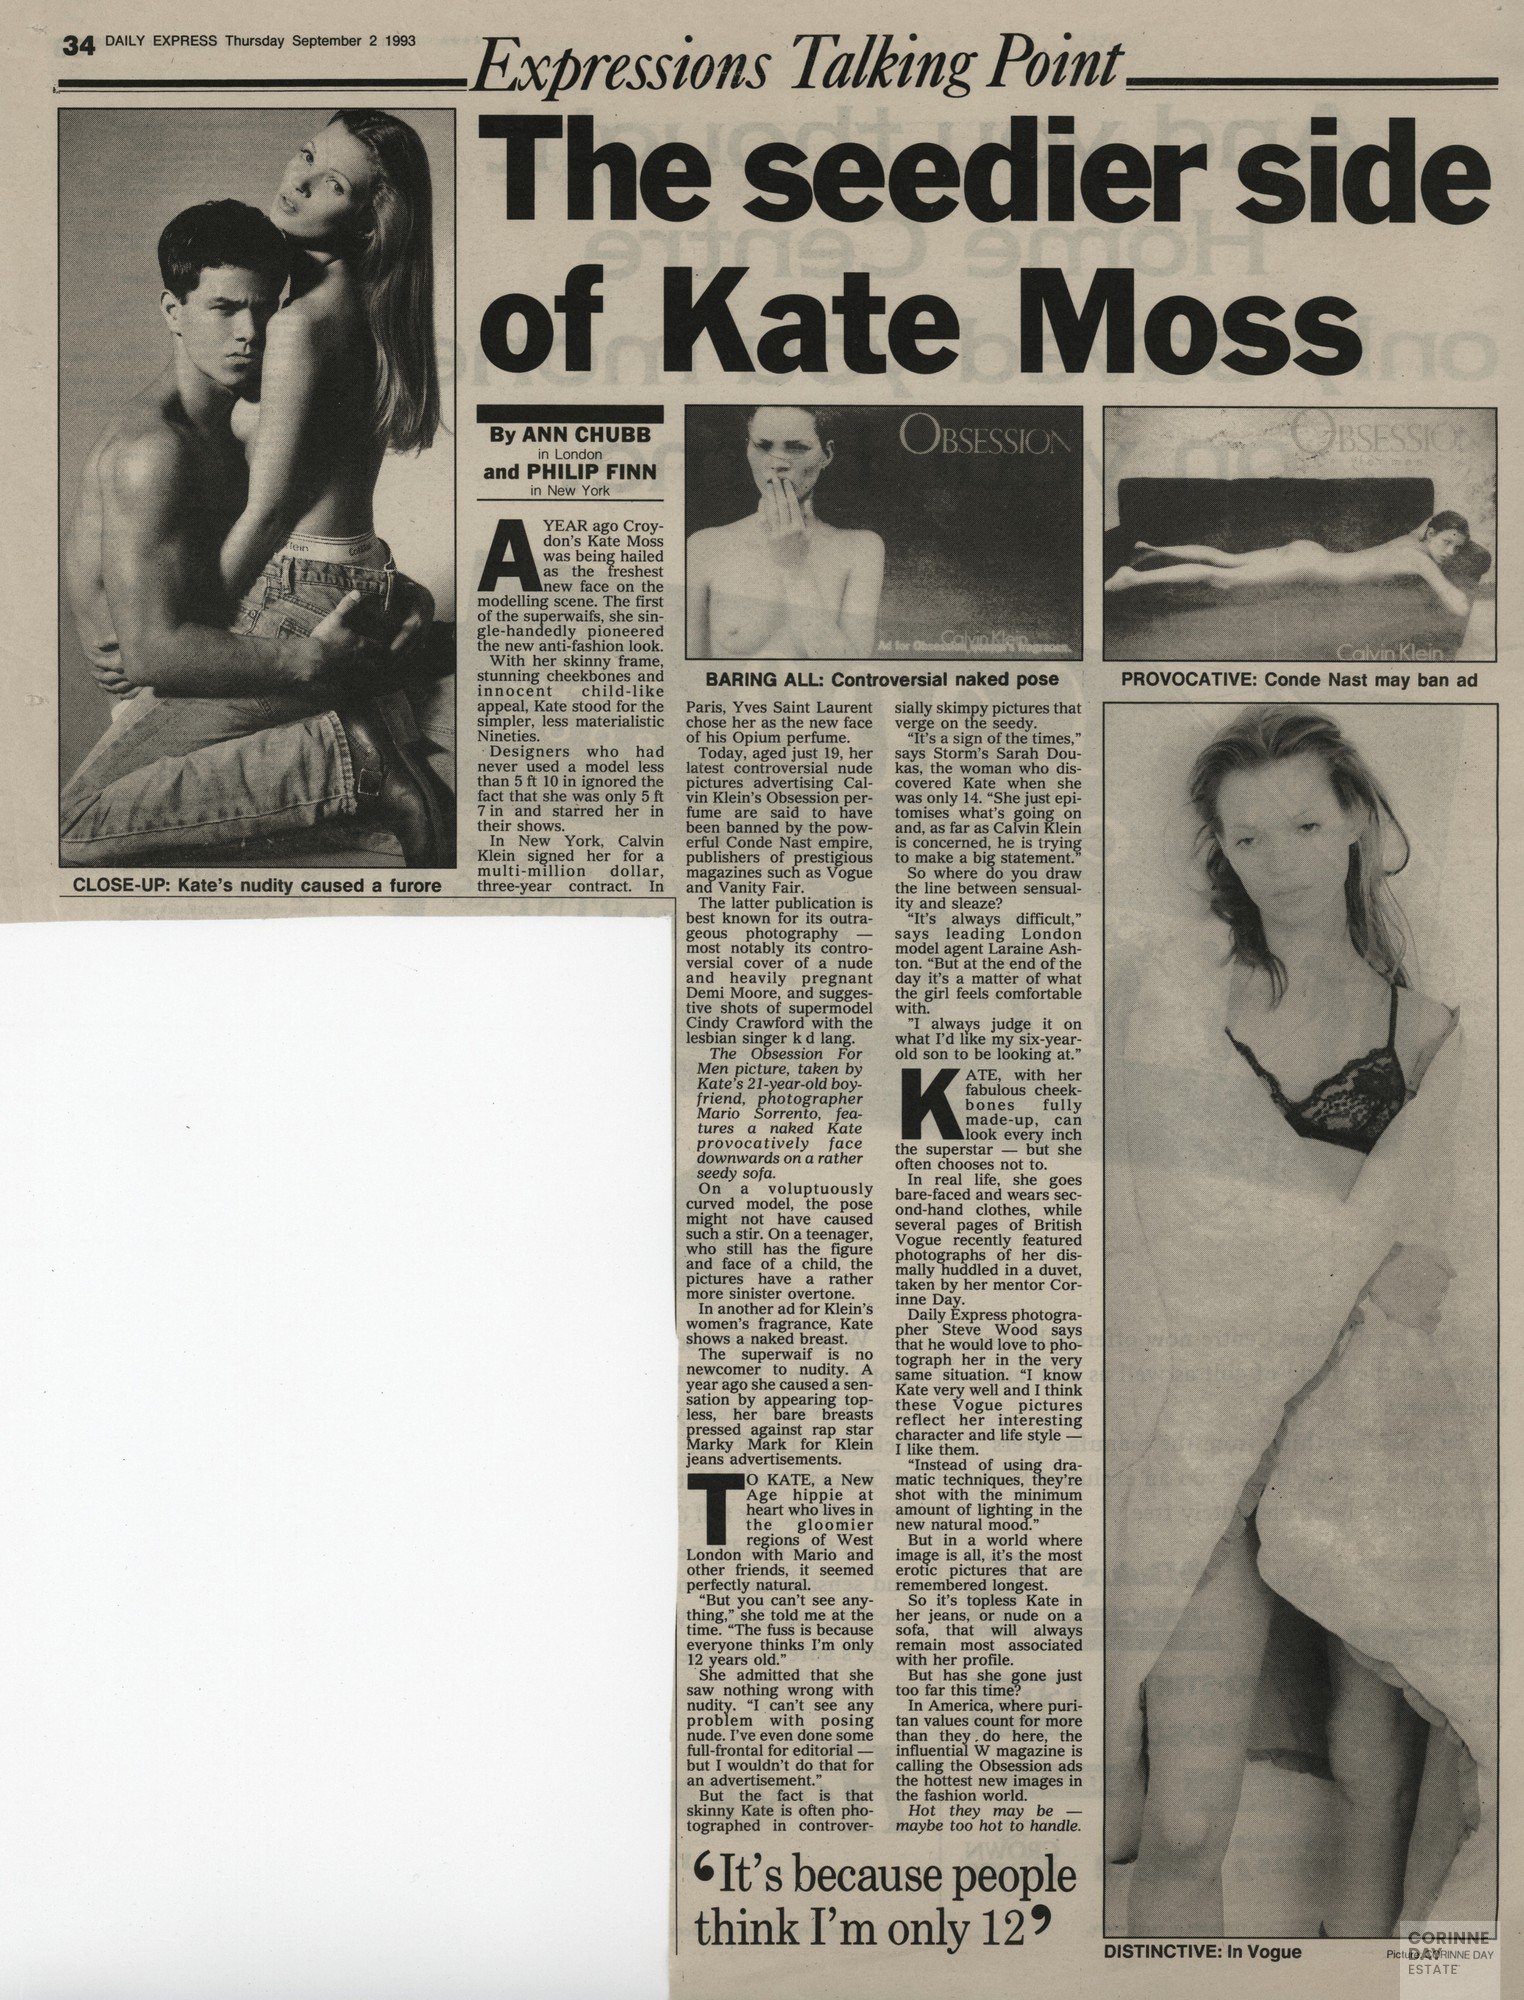 The seedier side of Kate Moss, Daily Express, 2 Sep 1993 — Image 1 of 1